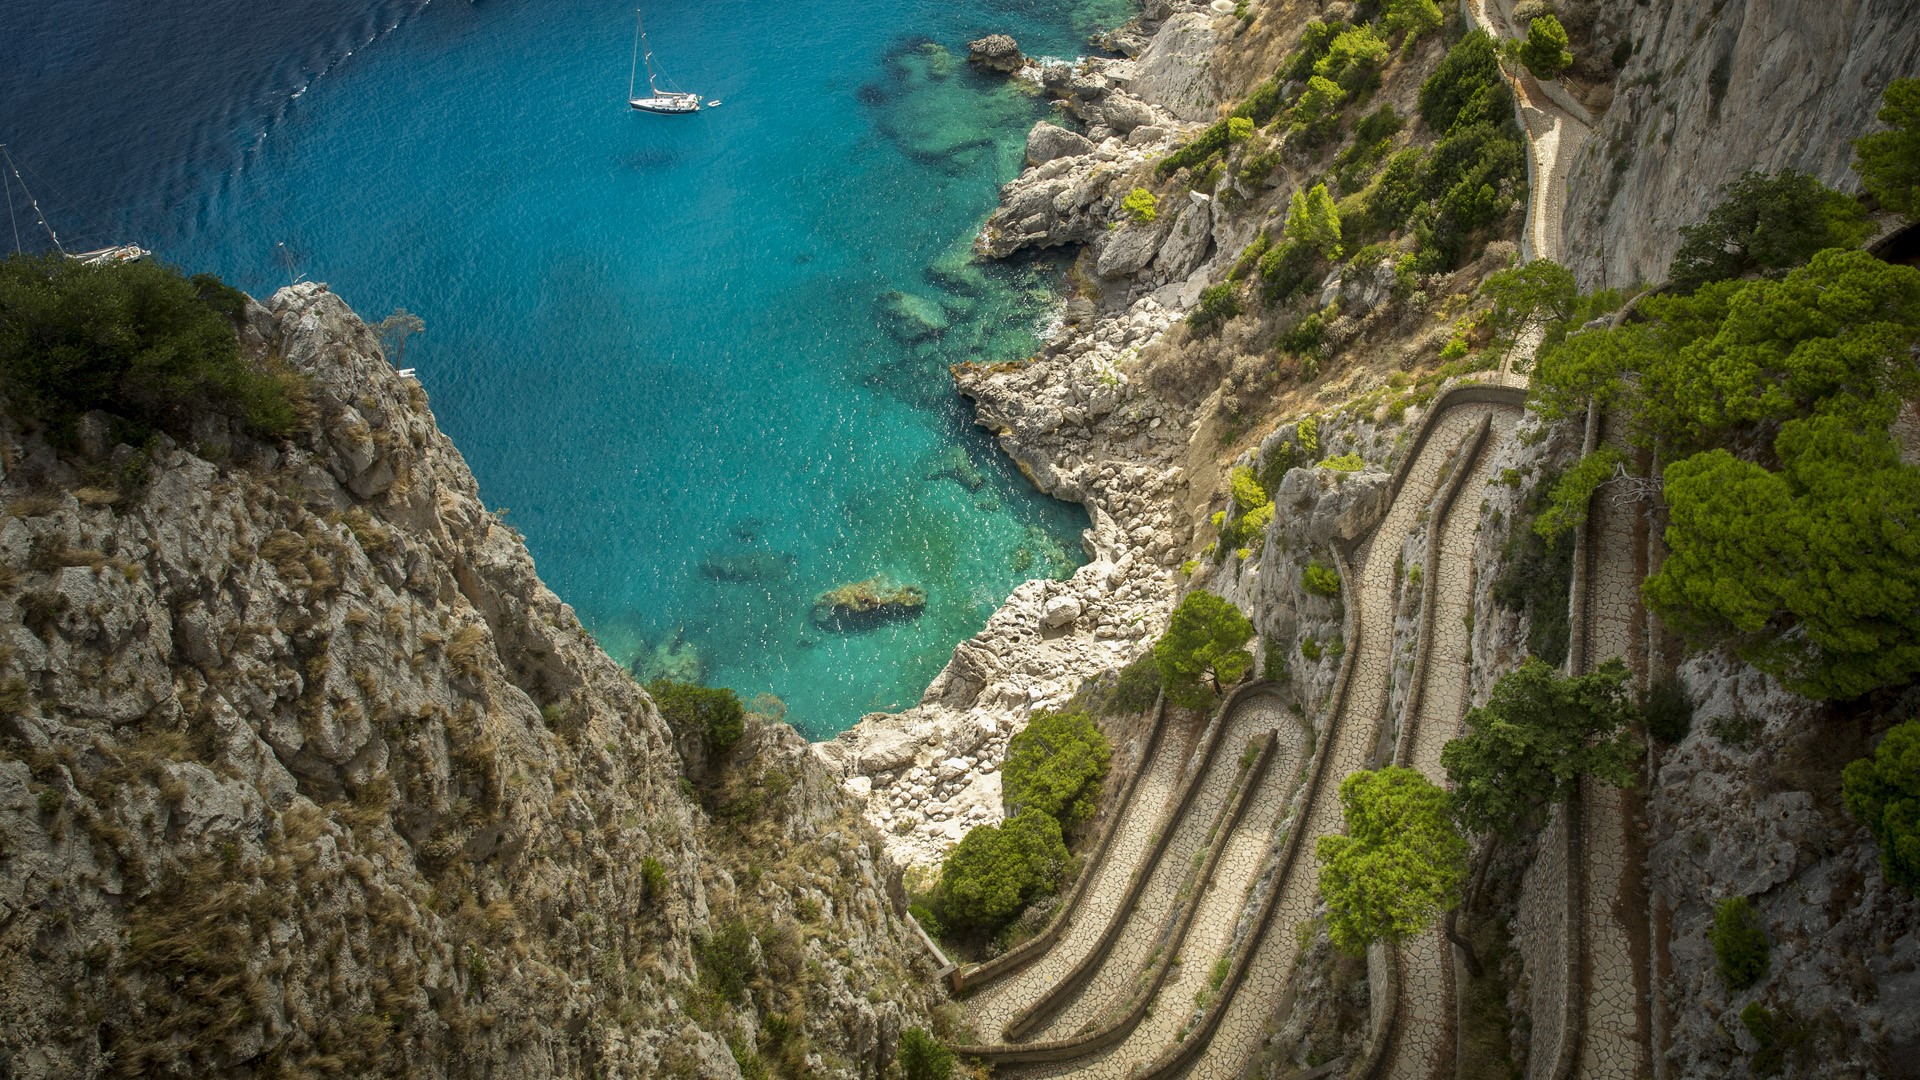 General 1920x1080 nature landscape water hairpin turns rocks coast trees boat sailboats path water ripples limestone Italy